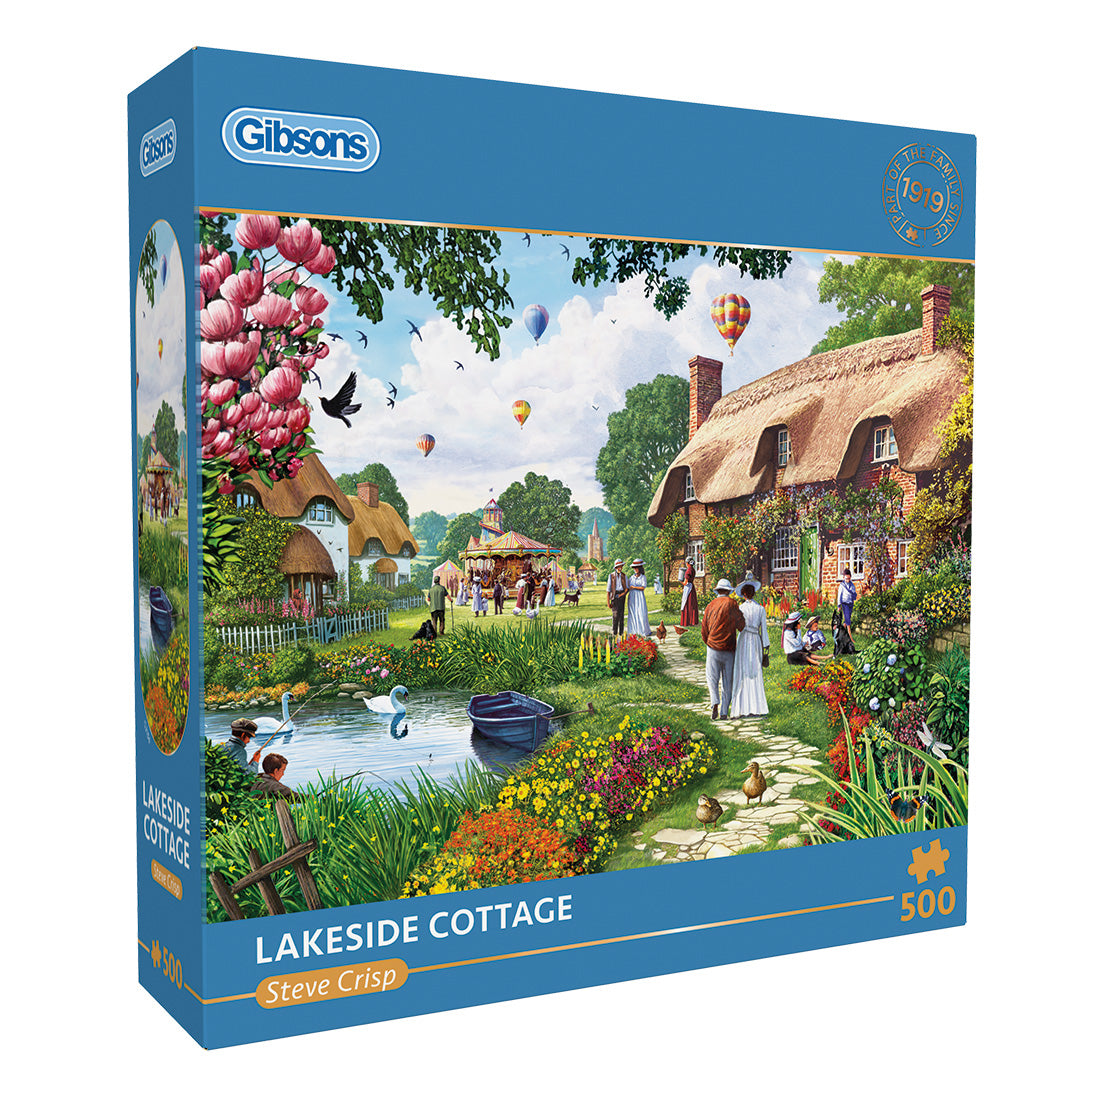 Gibsons - Lakeside Cottage - 500 Piece Jigsaw Puzzle